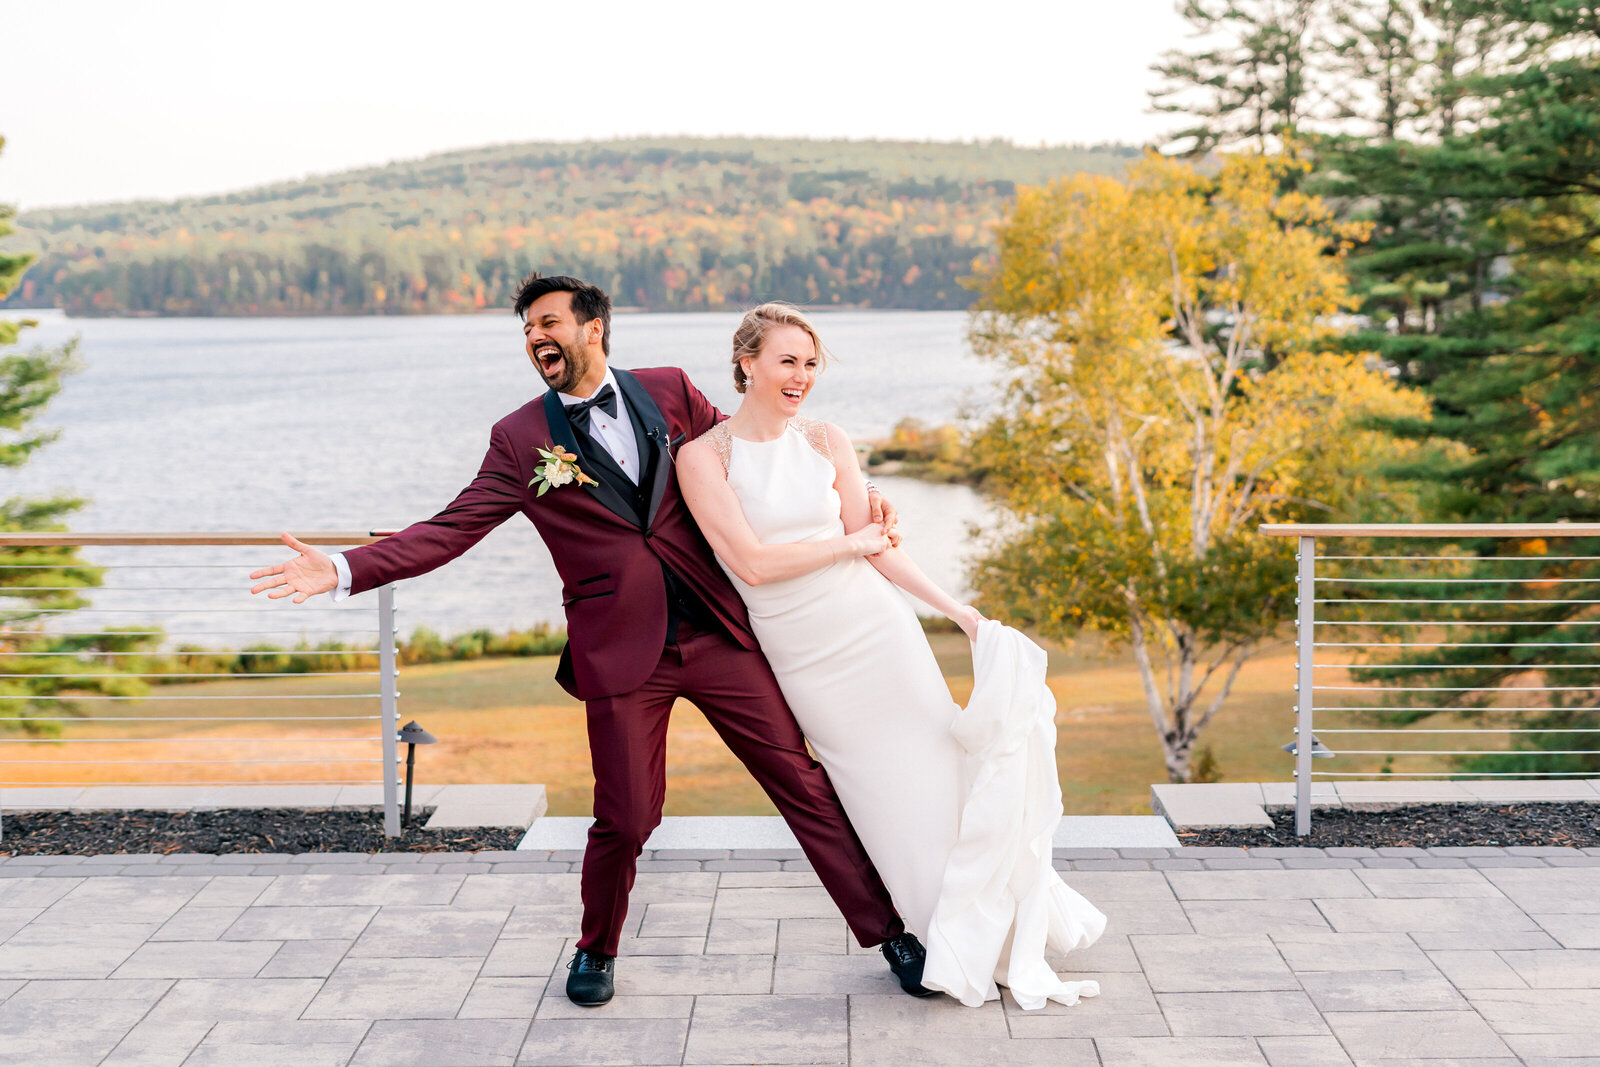 Couple dancing by a lake | Maine elopement photographer | Adventure and Vows